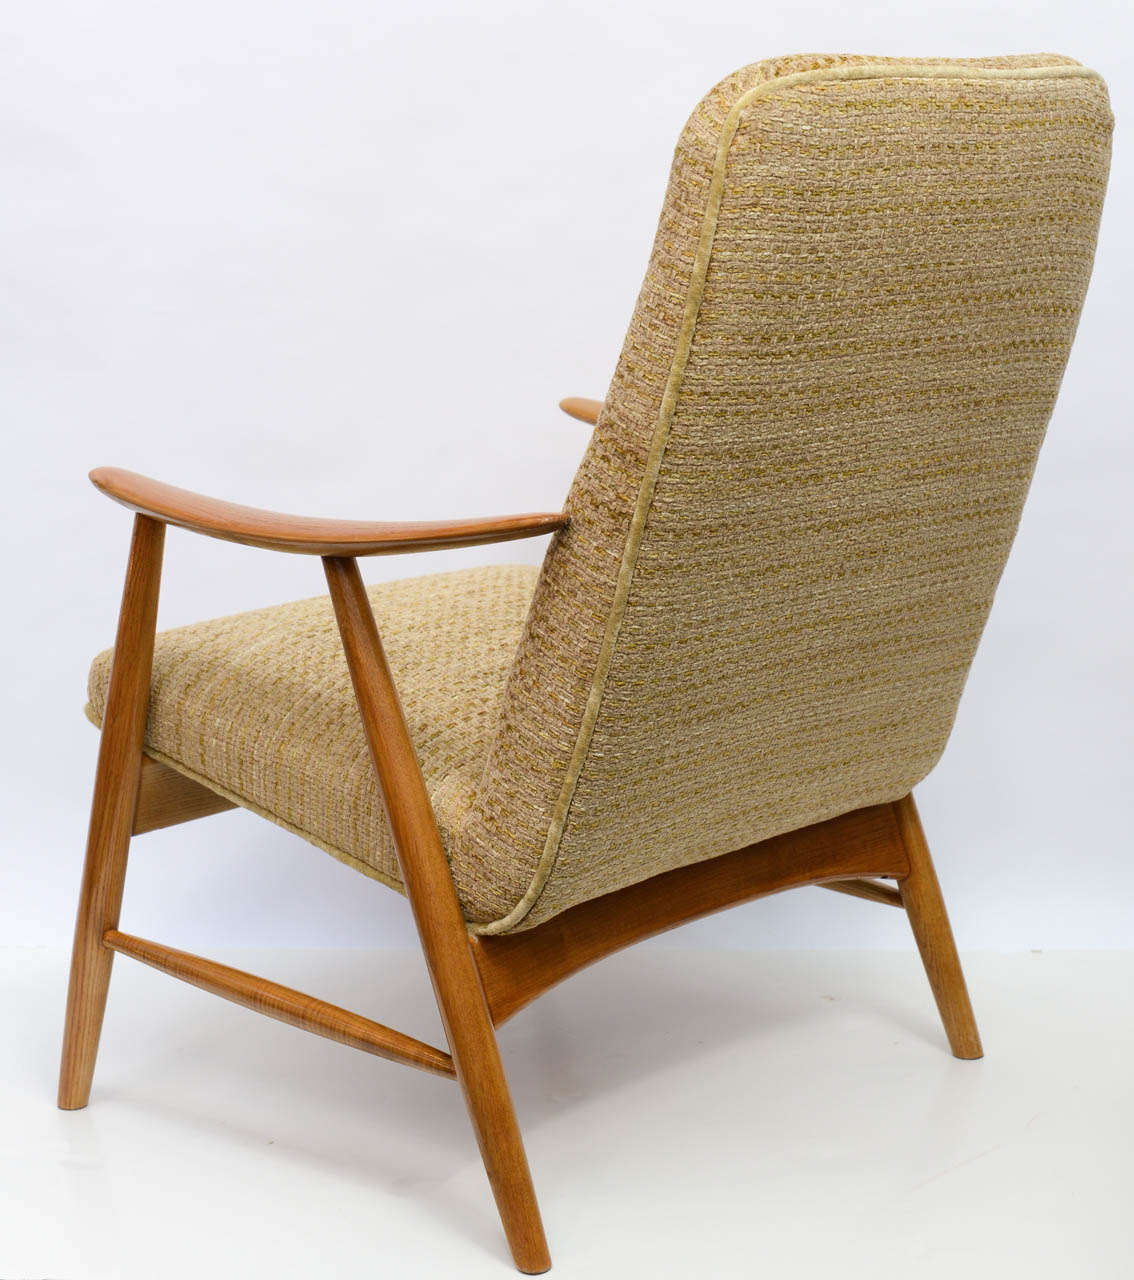 Wood Pair of Mid-Century Modern Armchairs in a style of Juhl, Grete Jalk and Wegner